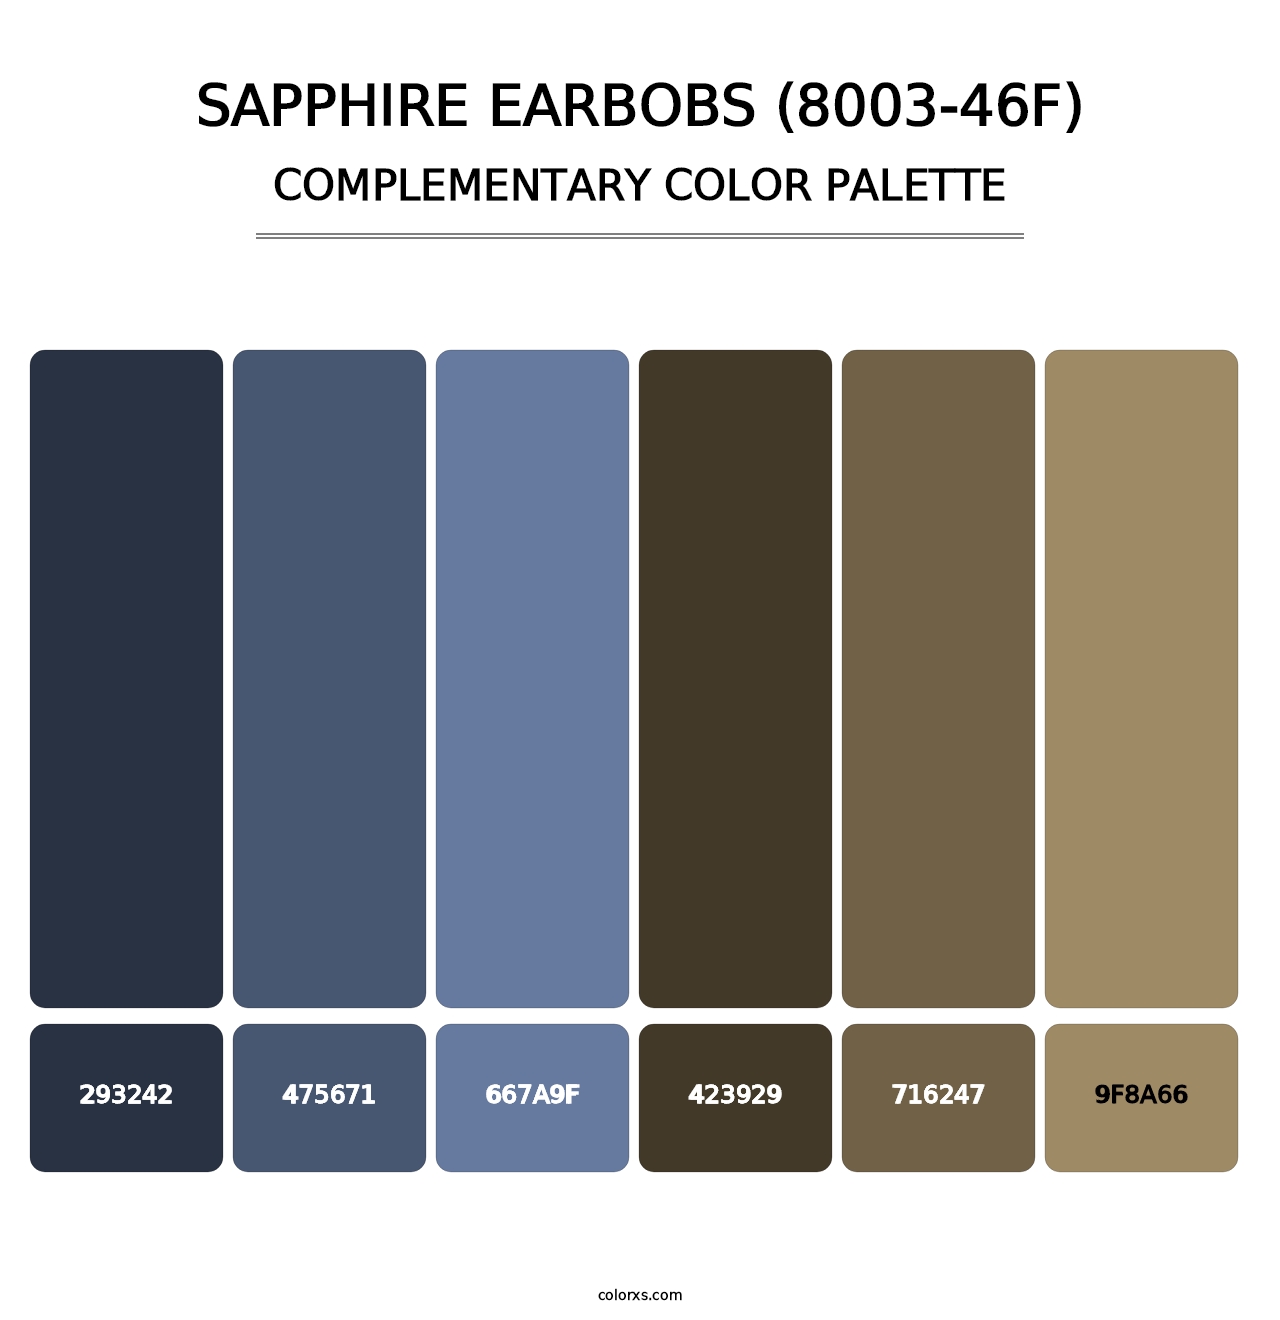 Sapphire Earbobs (8003-46F) - Complementary Color Palette